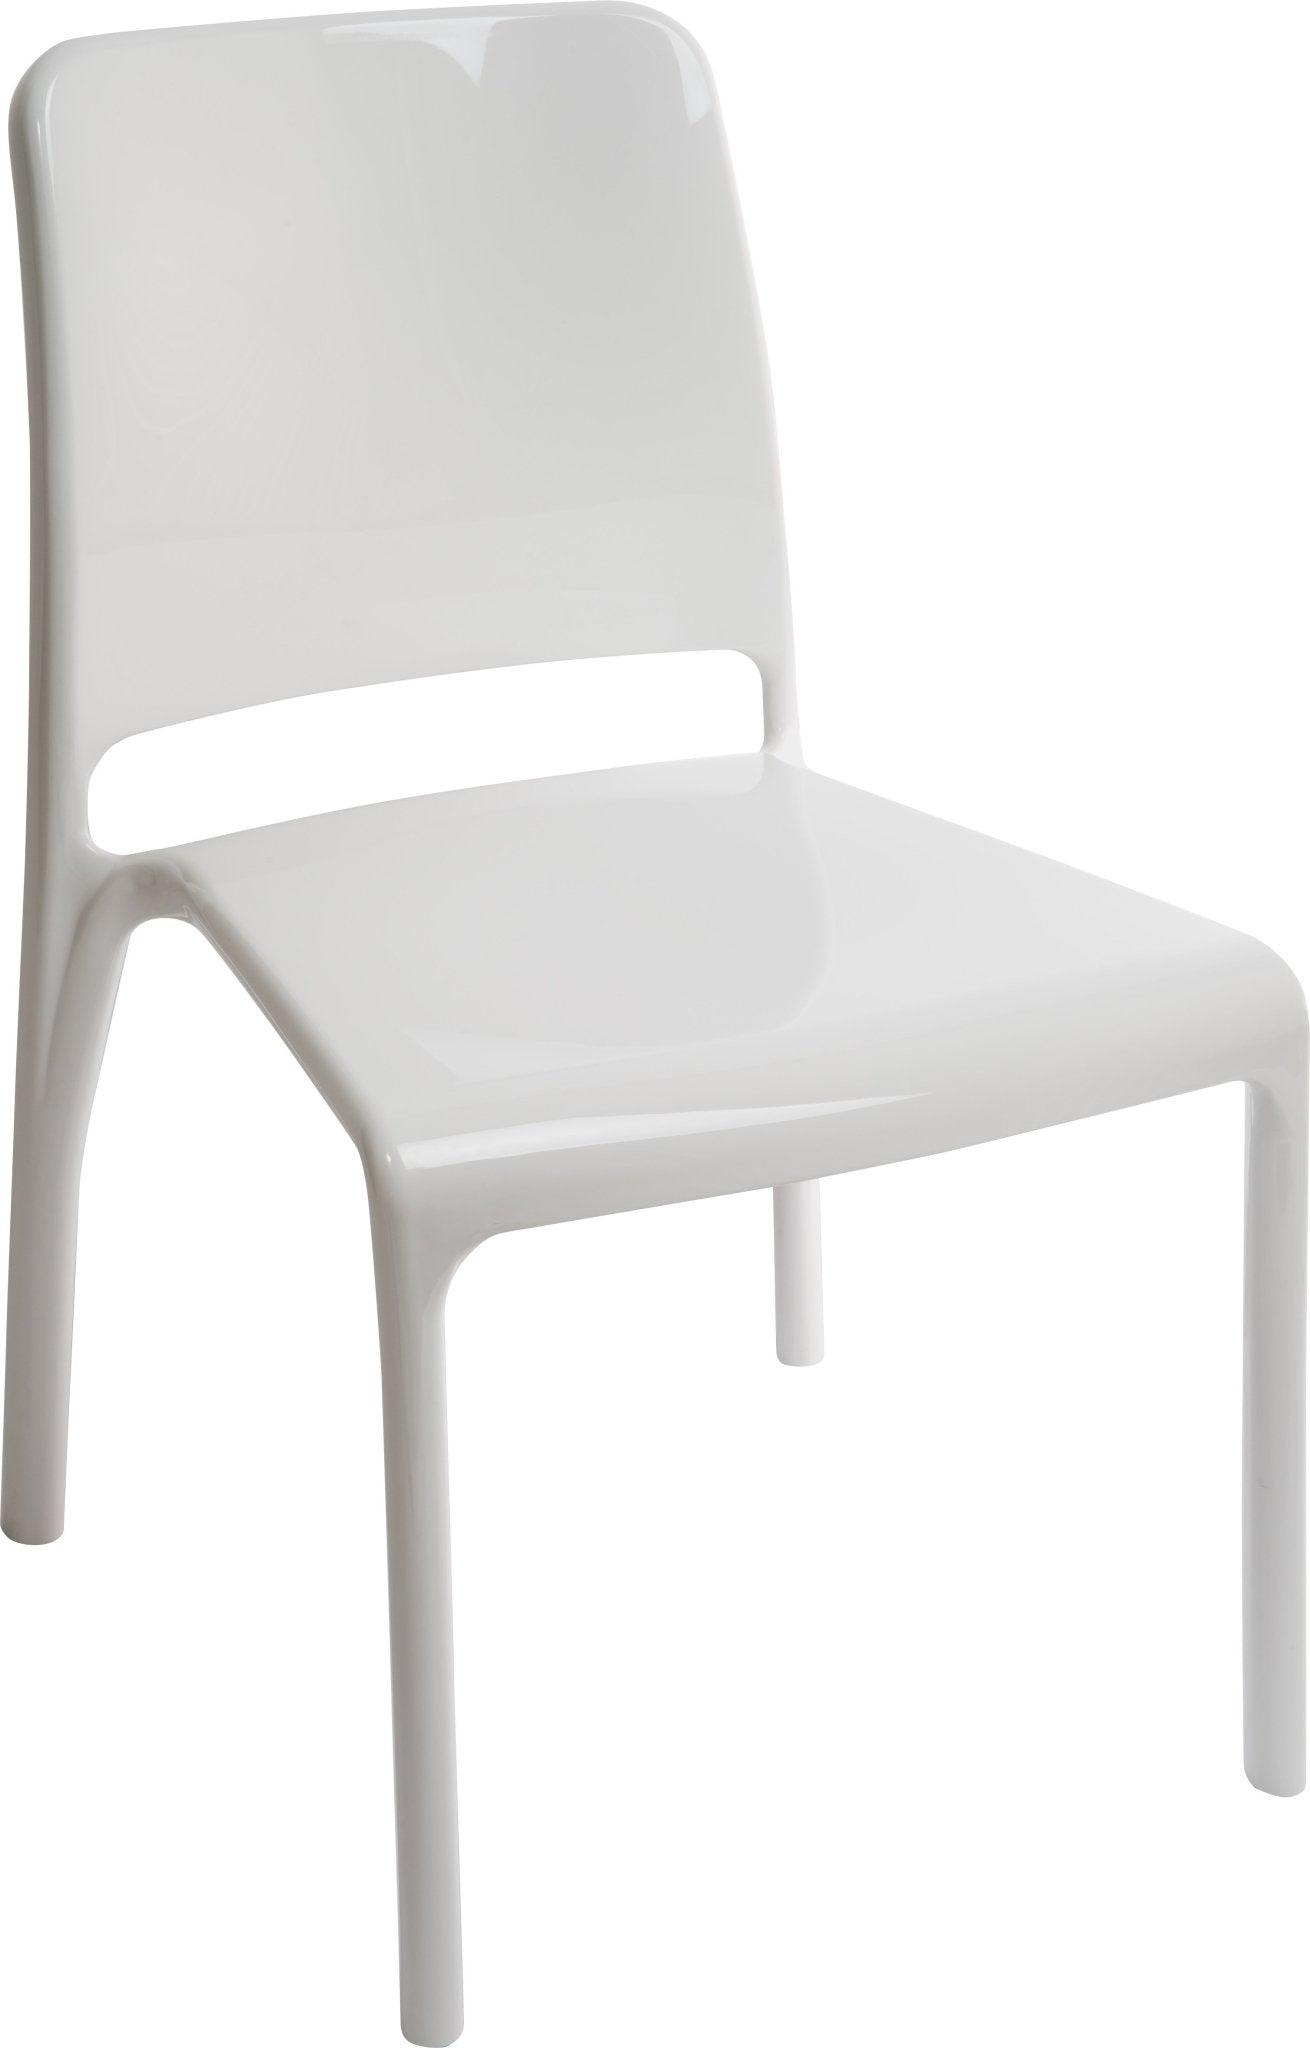 Clarity dining room chair (white) pack of 4 - crimblefest furniture - image 1